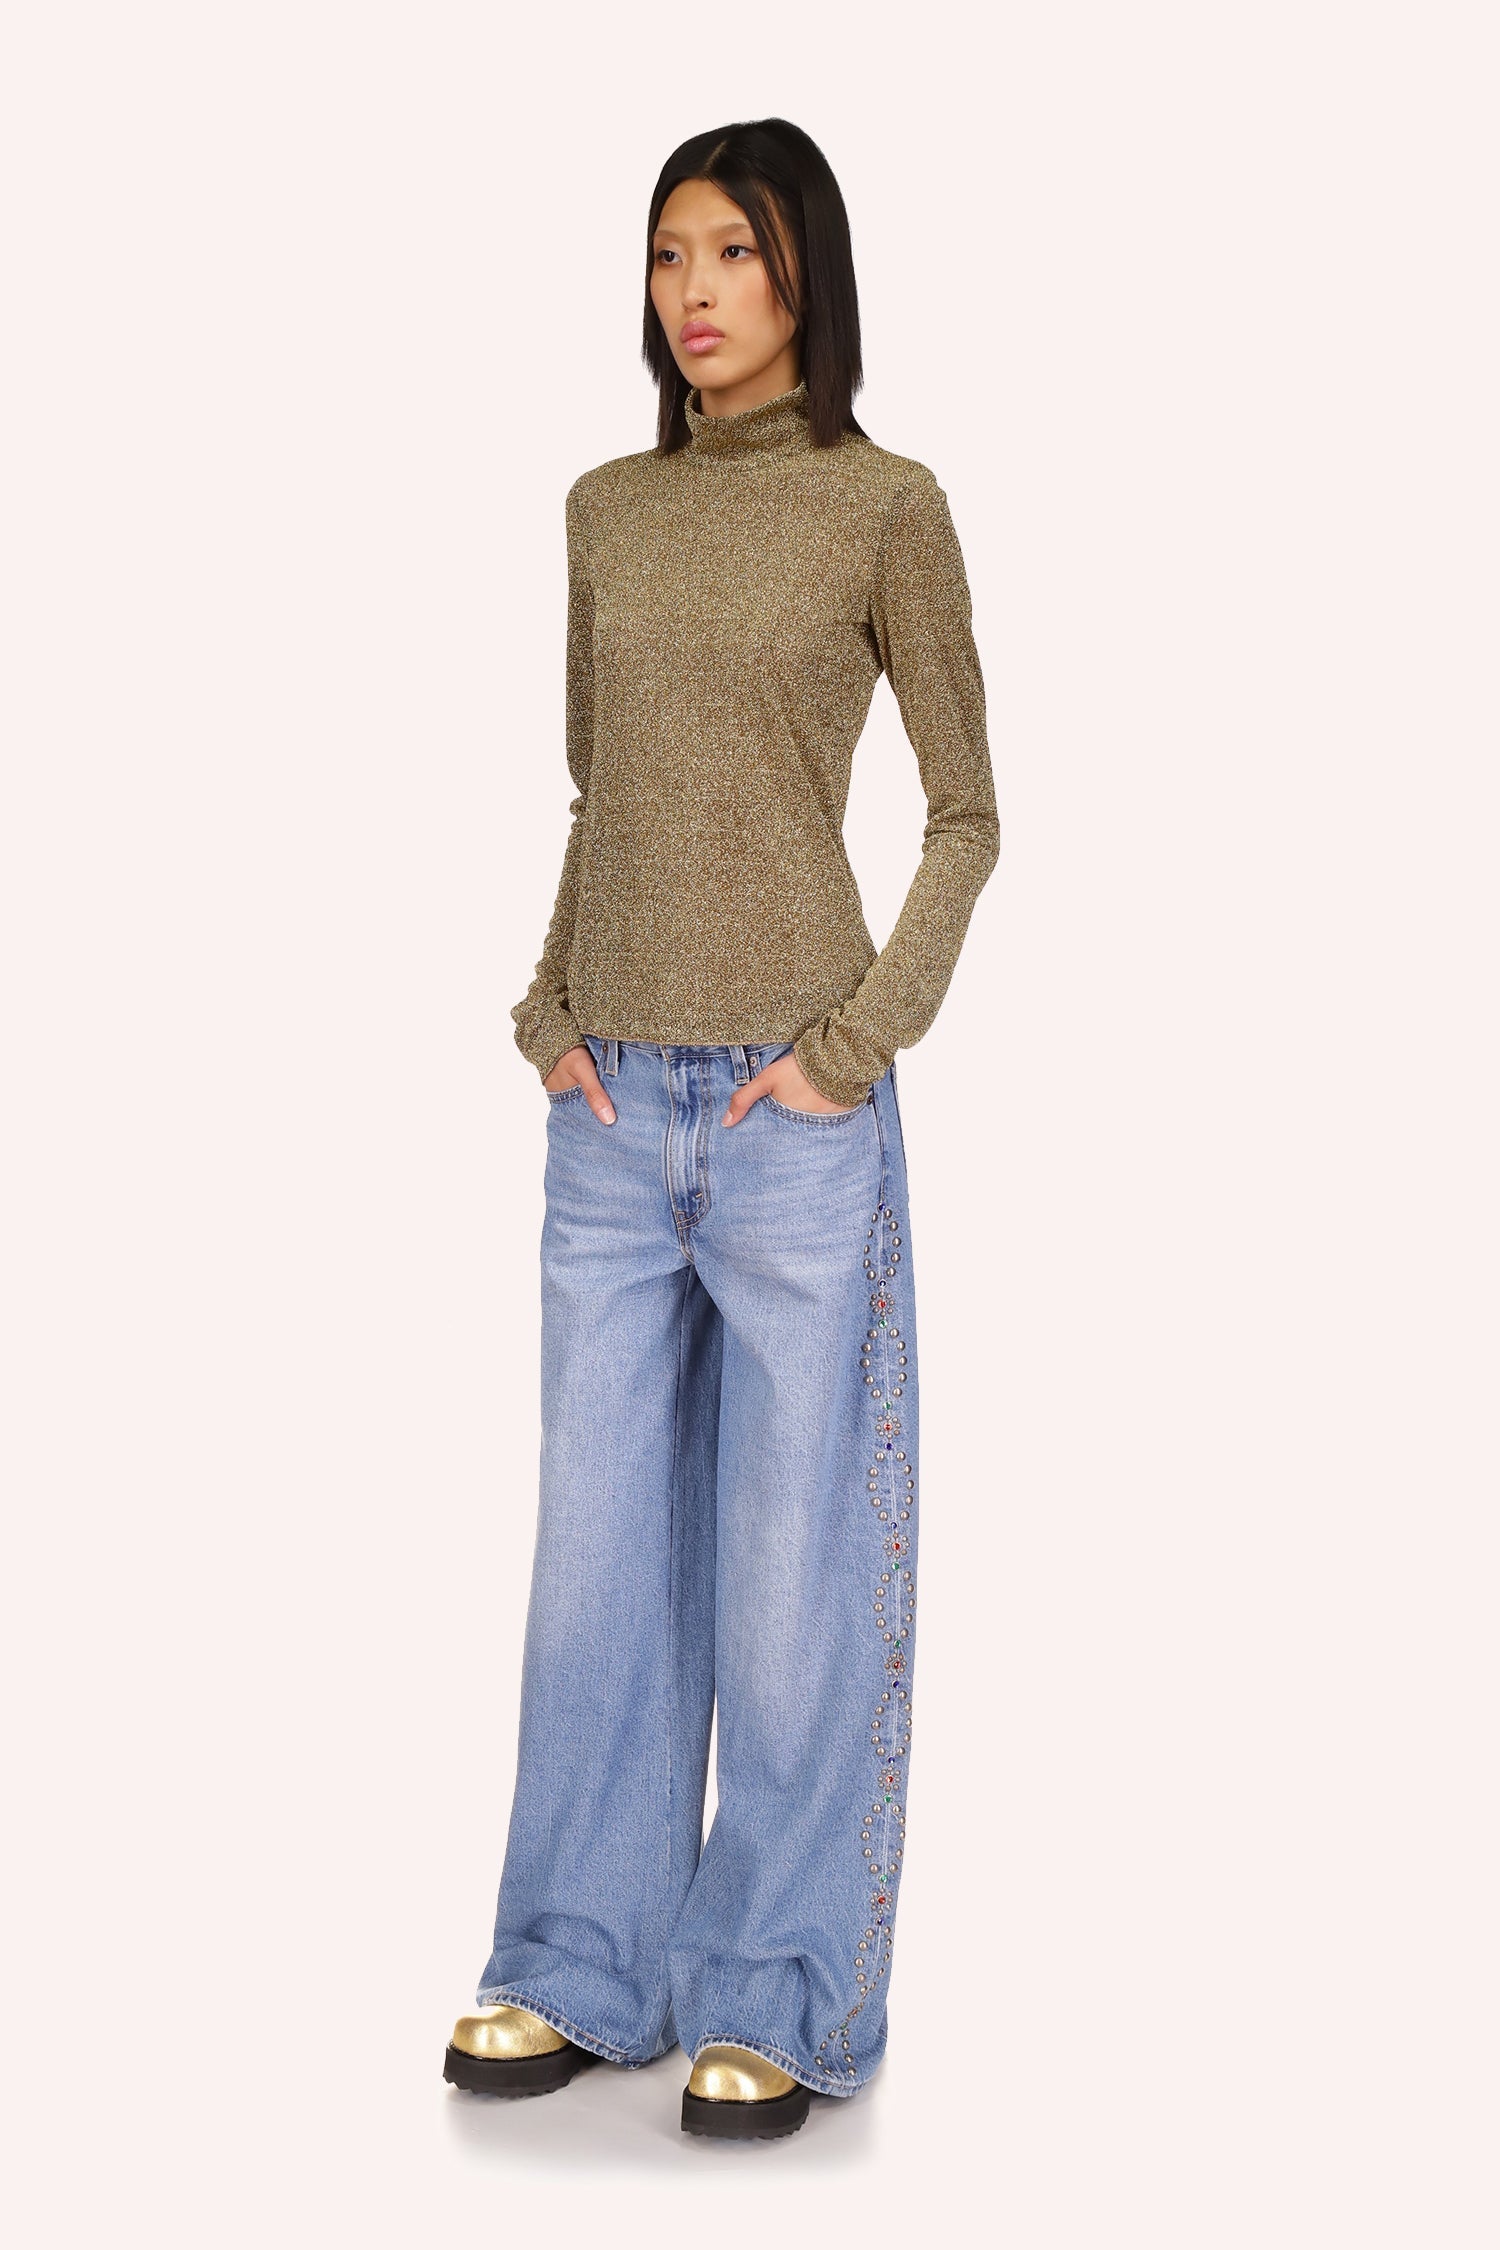 Sparkling gold color and turtleneck. Features very long sleeves that can be worn over the hands